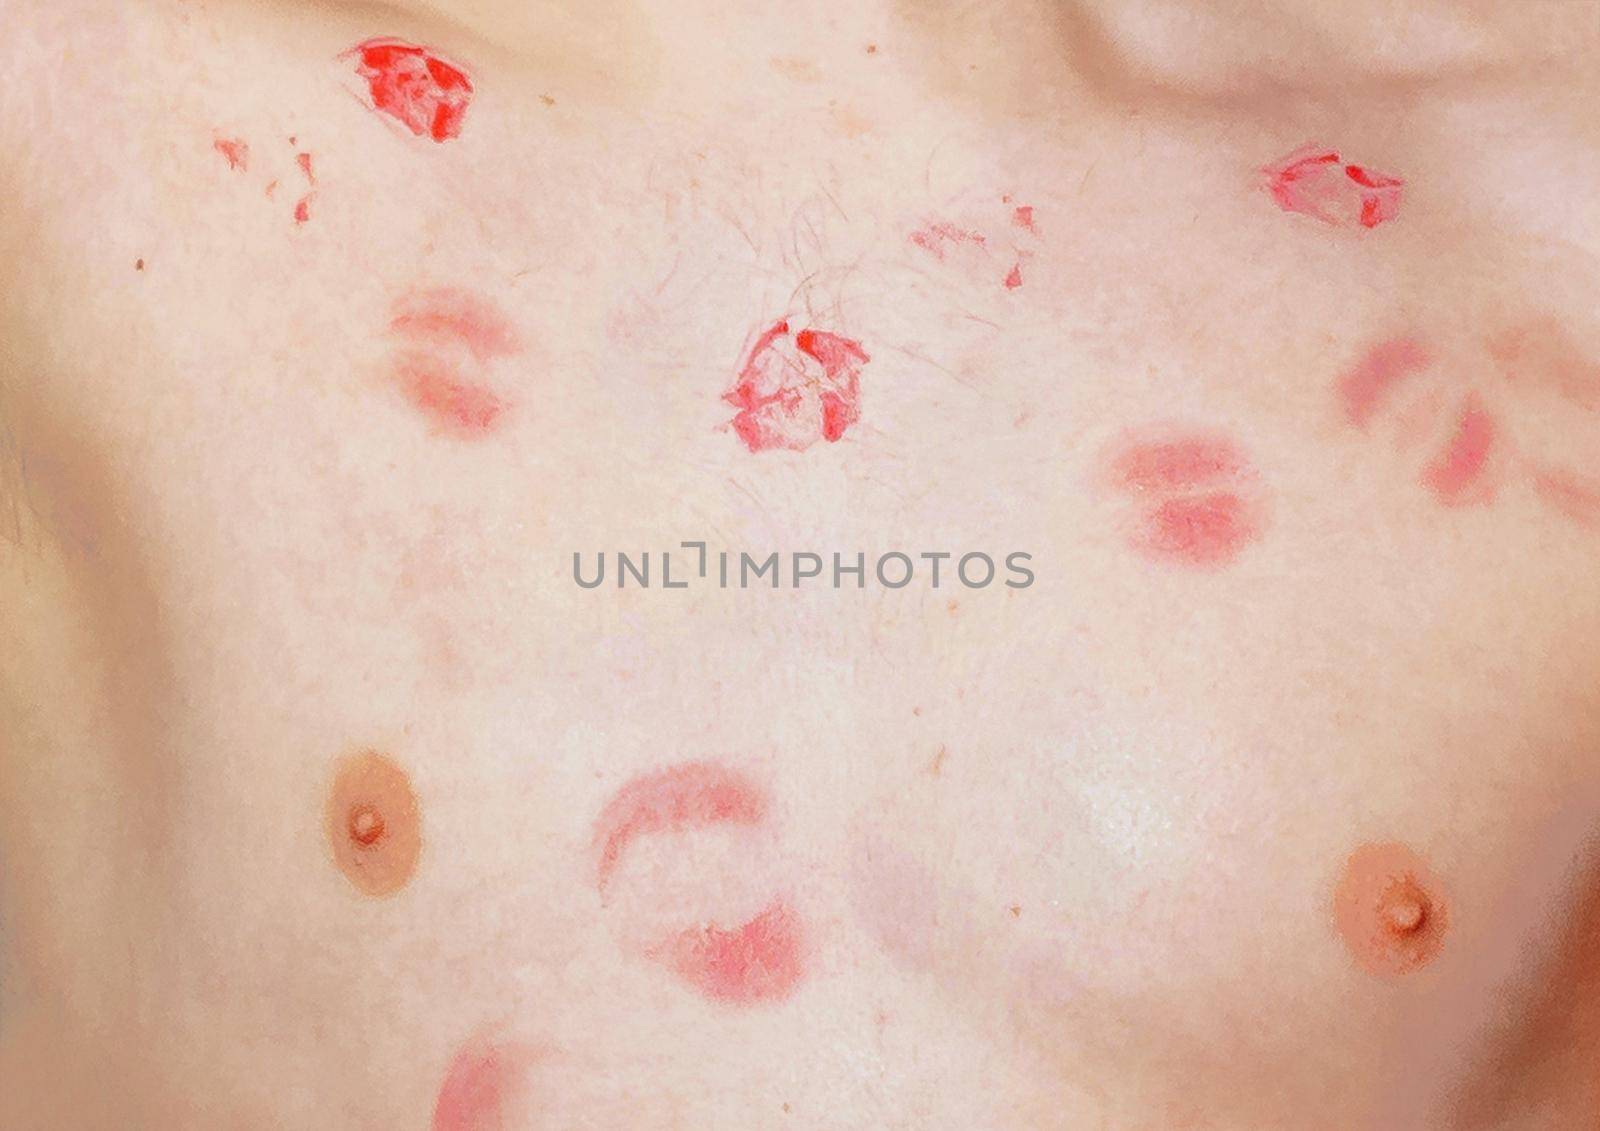 Traces of kisses of red lipstick on the body and chest of a guy, close-up.